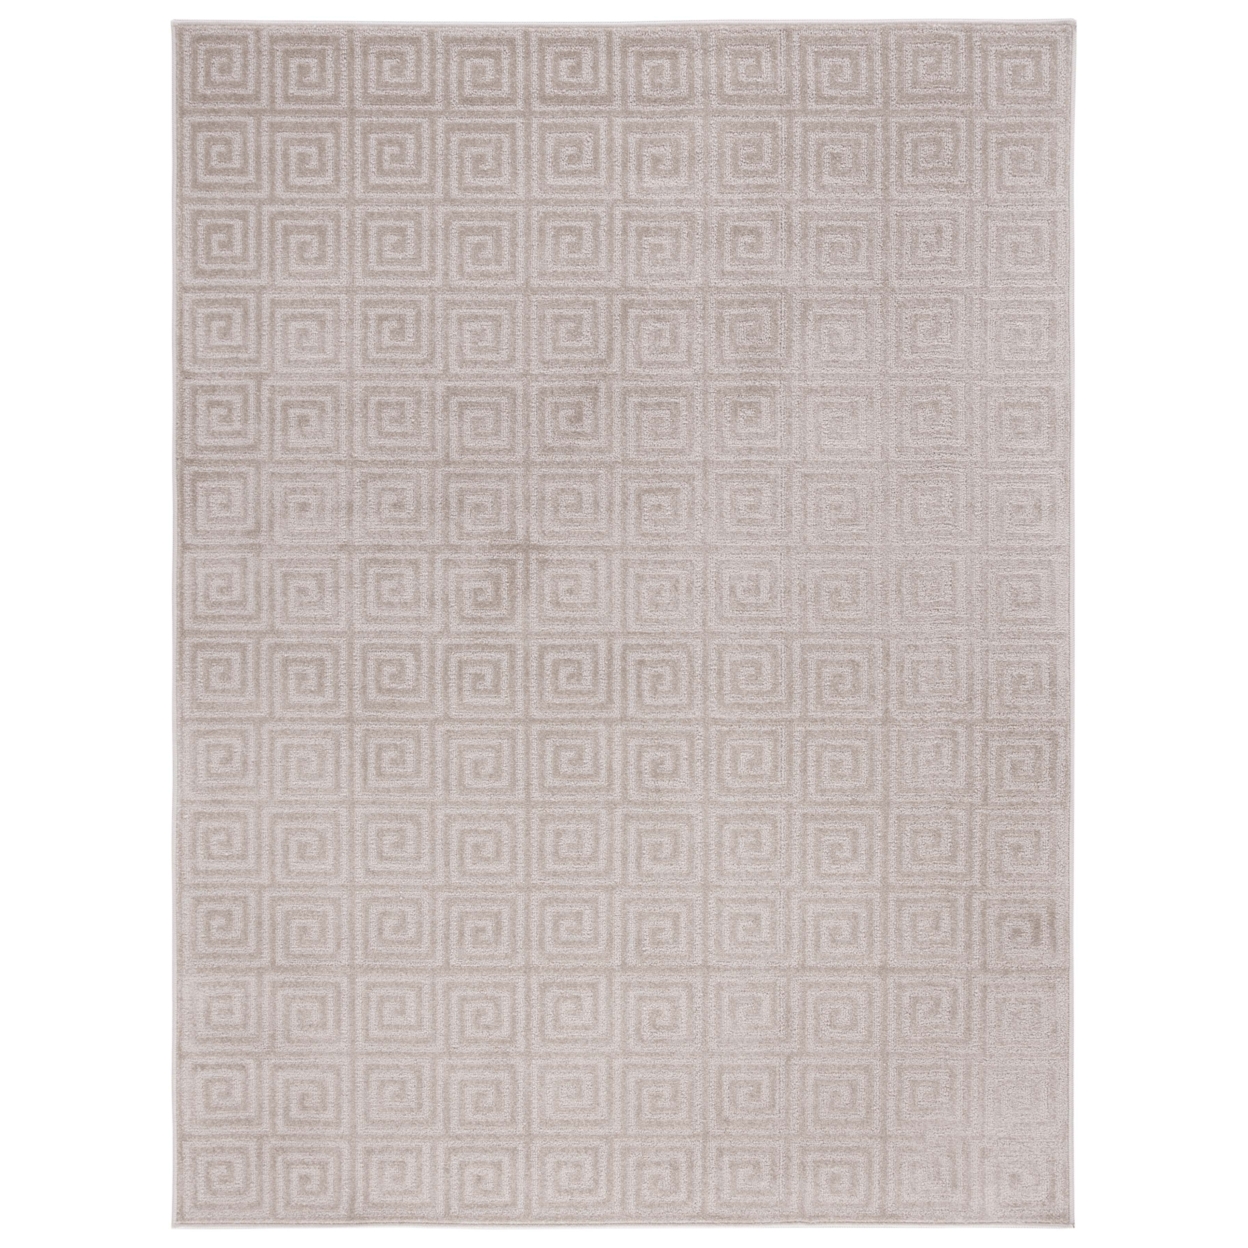 Safavieh PNS412B Pattern And Solid Beige - Beige / Ivory, 5'-3 X 7'-6 Rectangle